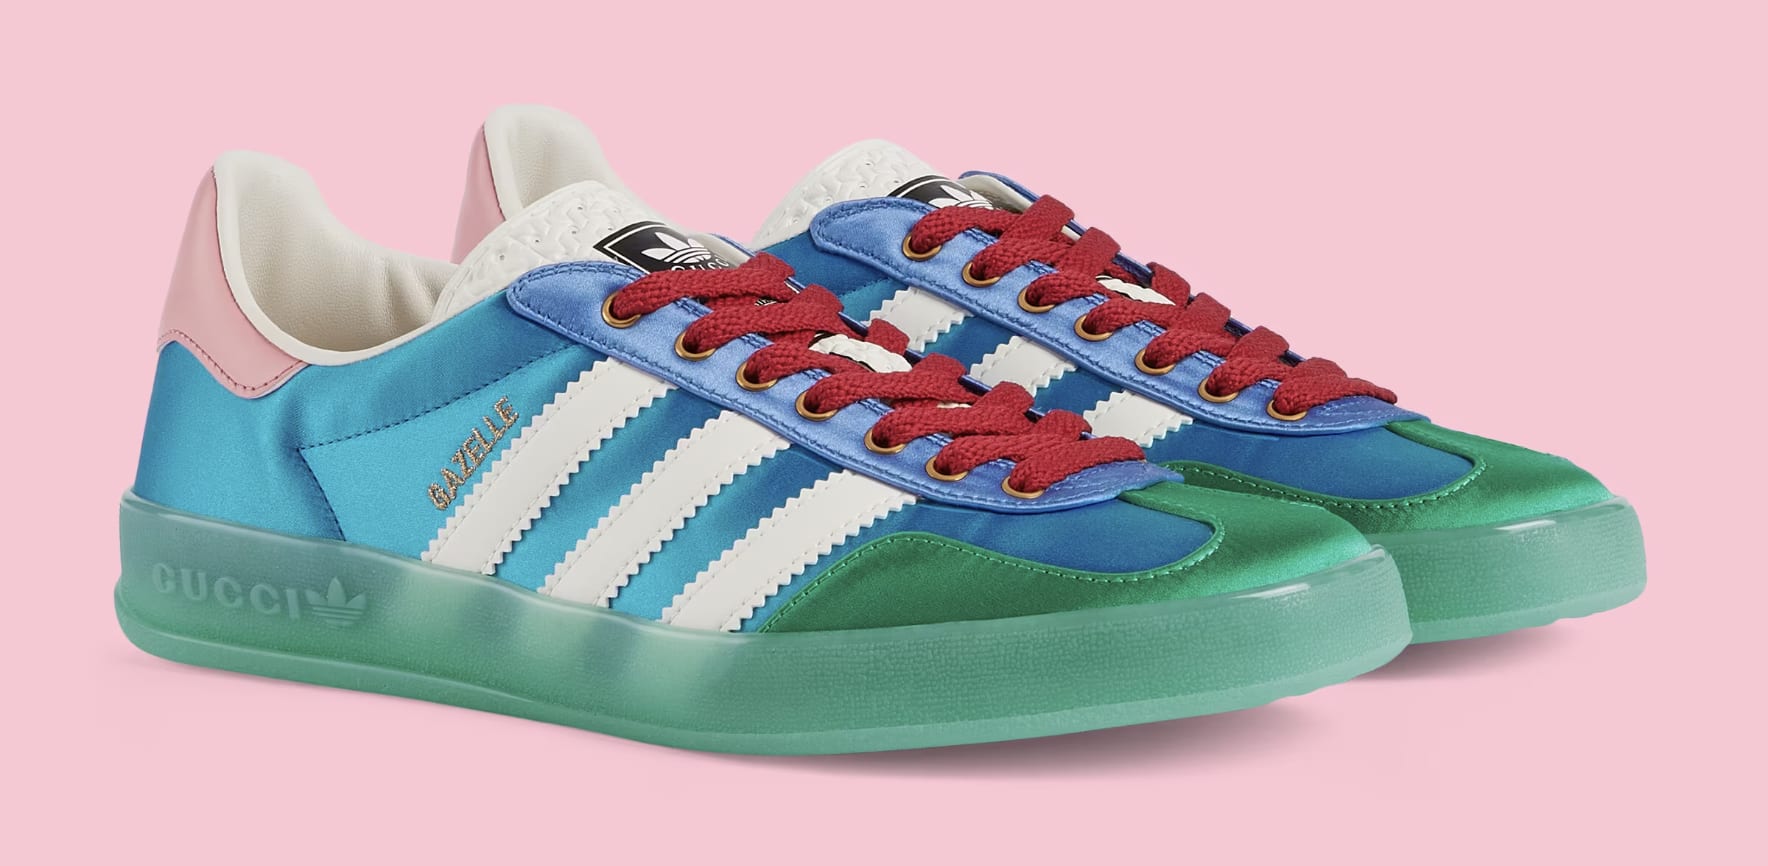 buis Nominaal een adidas x Gucci Gazelle Collection Release Date June 2022 | Sole Collector